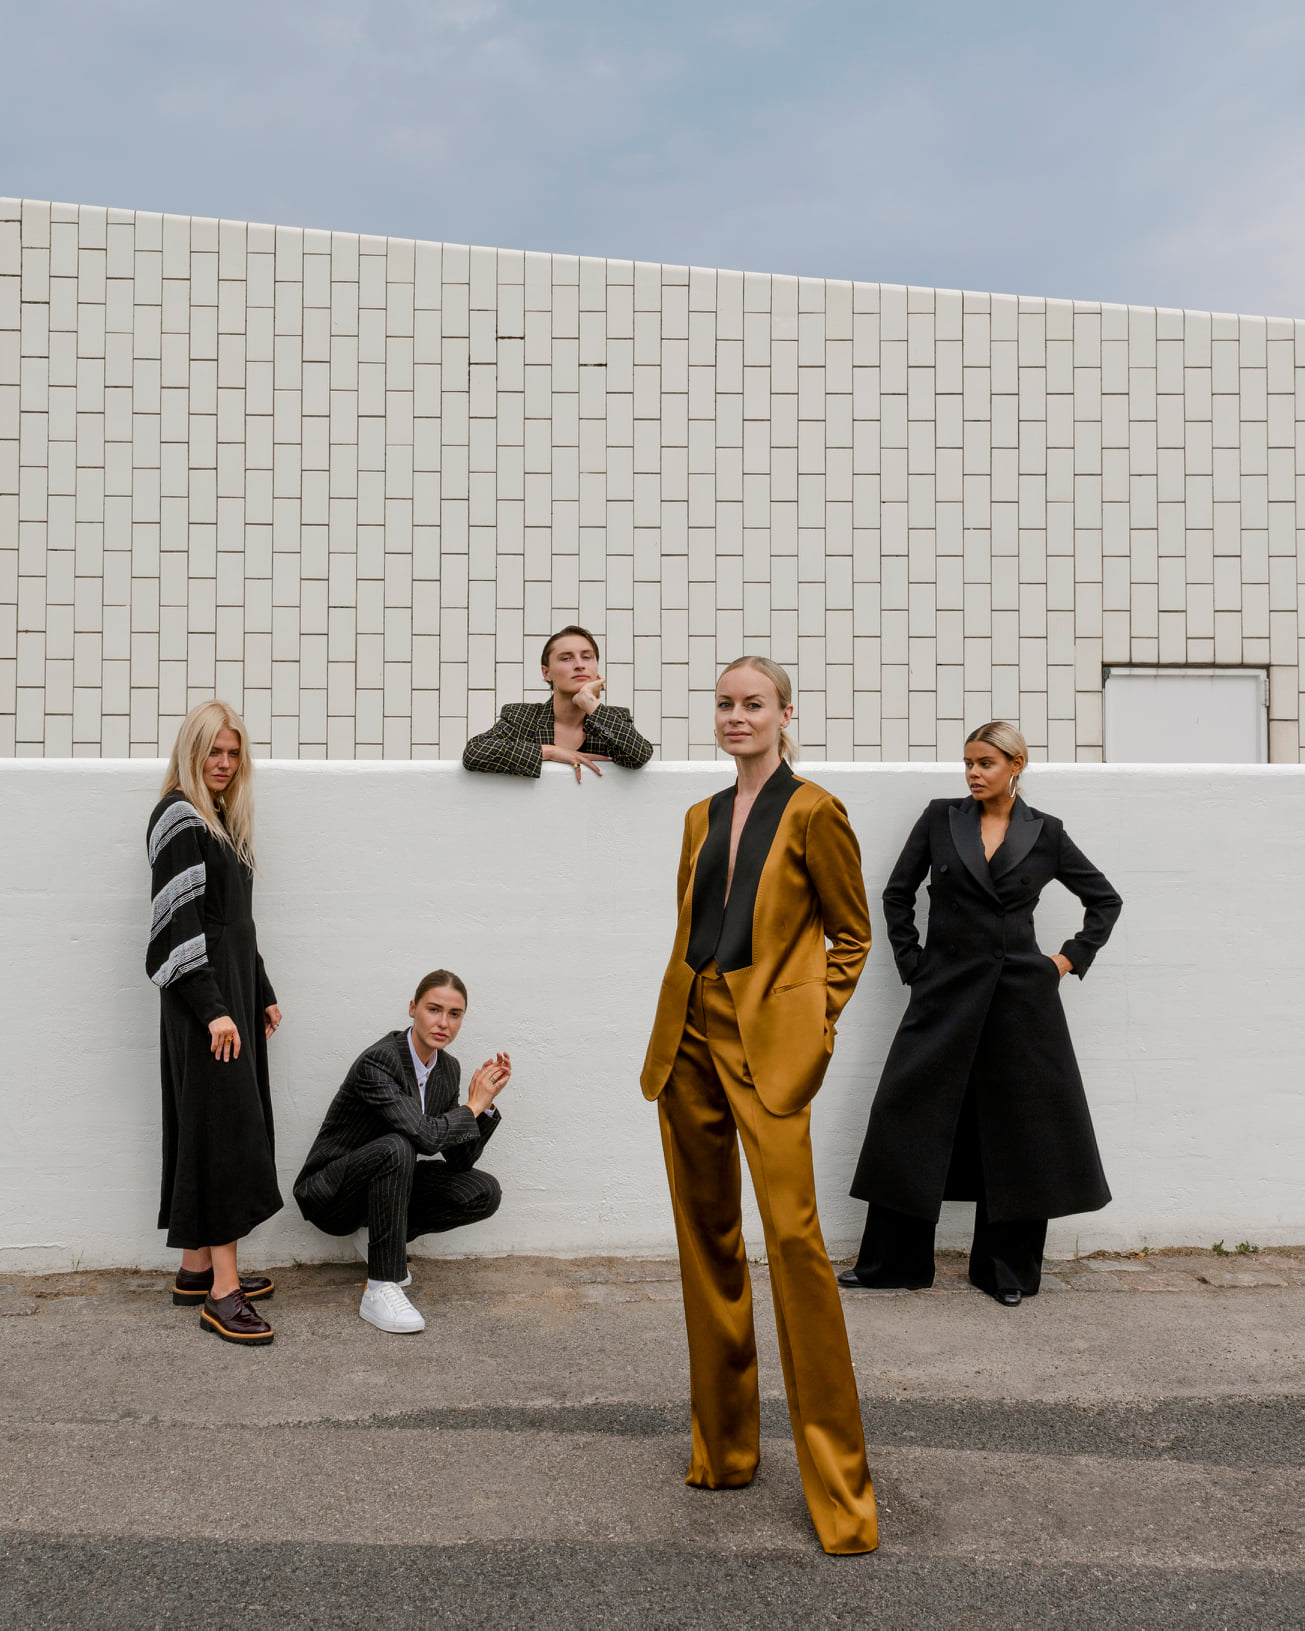 Five Copenhagen-based creatives offer a stylish take on the current Paul Smith collection as they journey from the fishing village of Skovshoved to the vibrant district of Kødbyen. Find out more: paul-smith.co/tVUwip